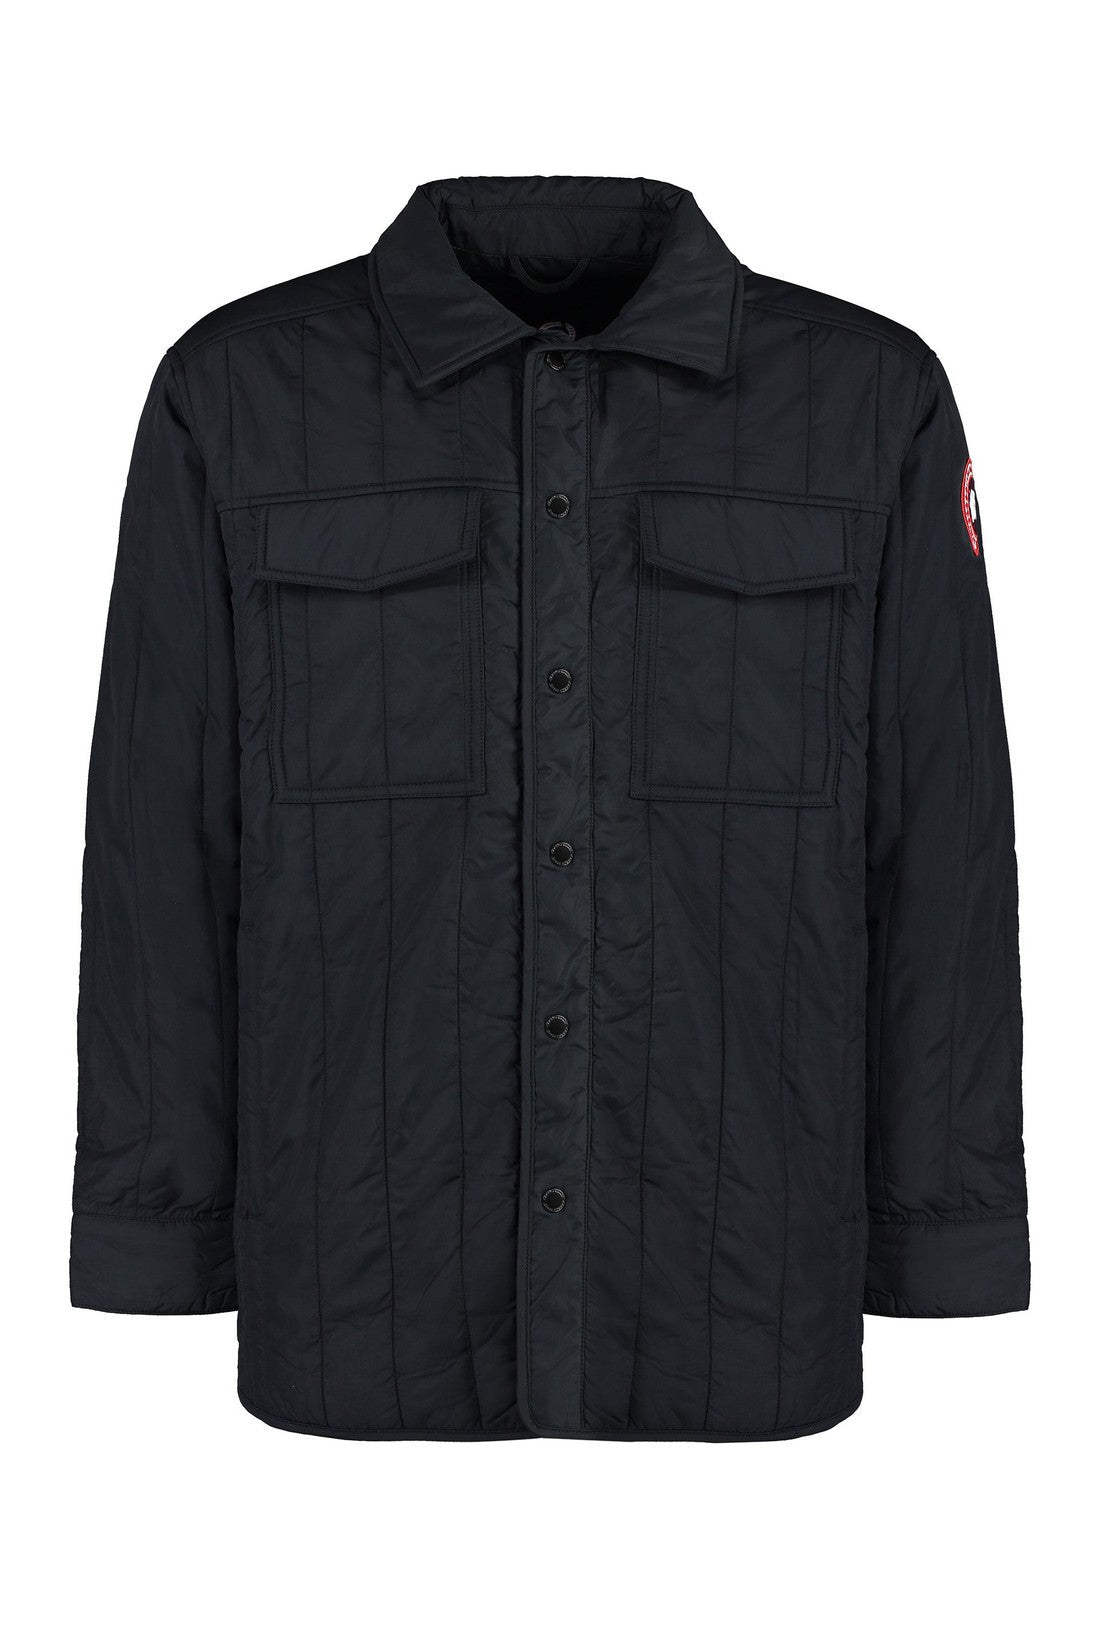 Canada Goose-OUTLET-SALE-Carlyle technical fabric overshirt-ARCHIVIST